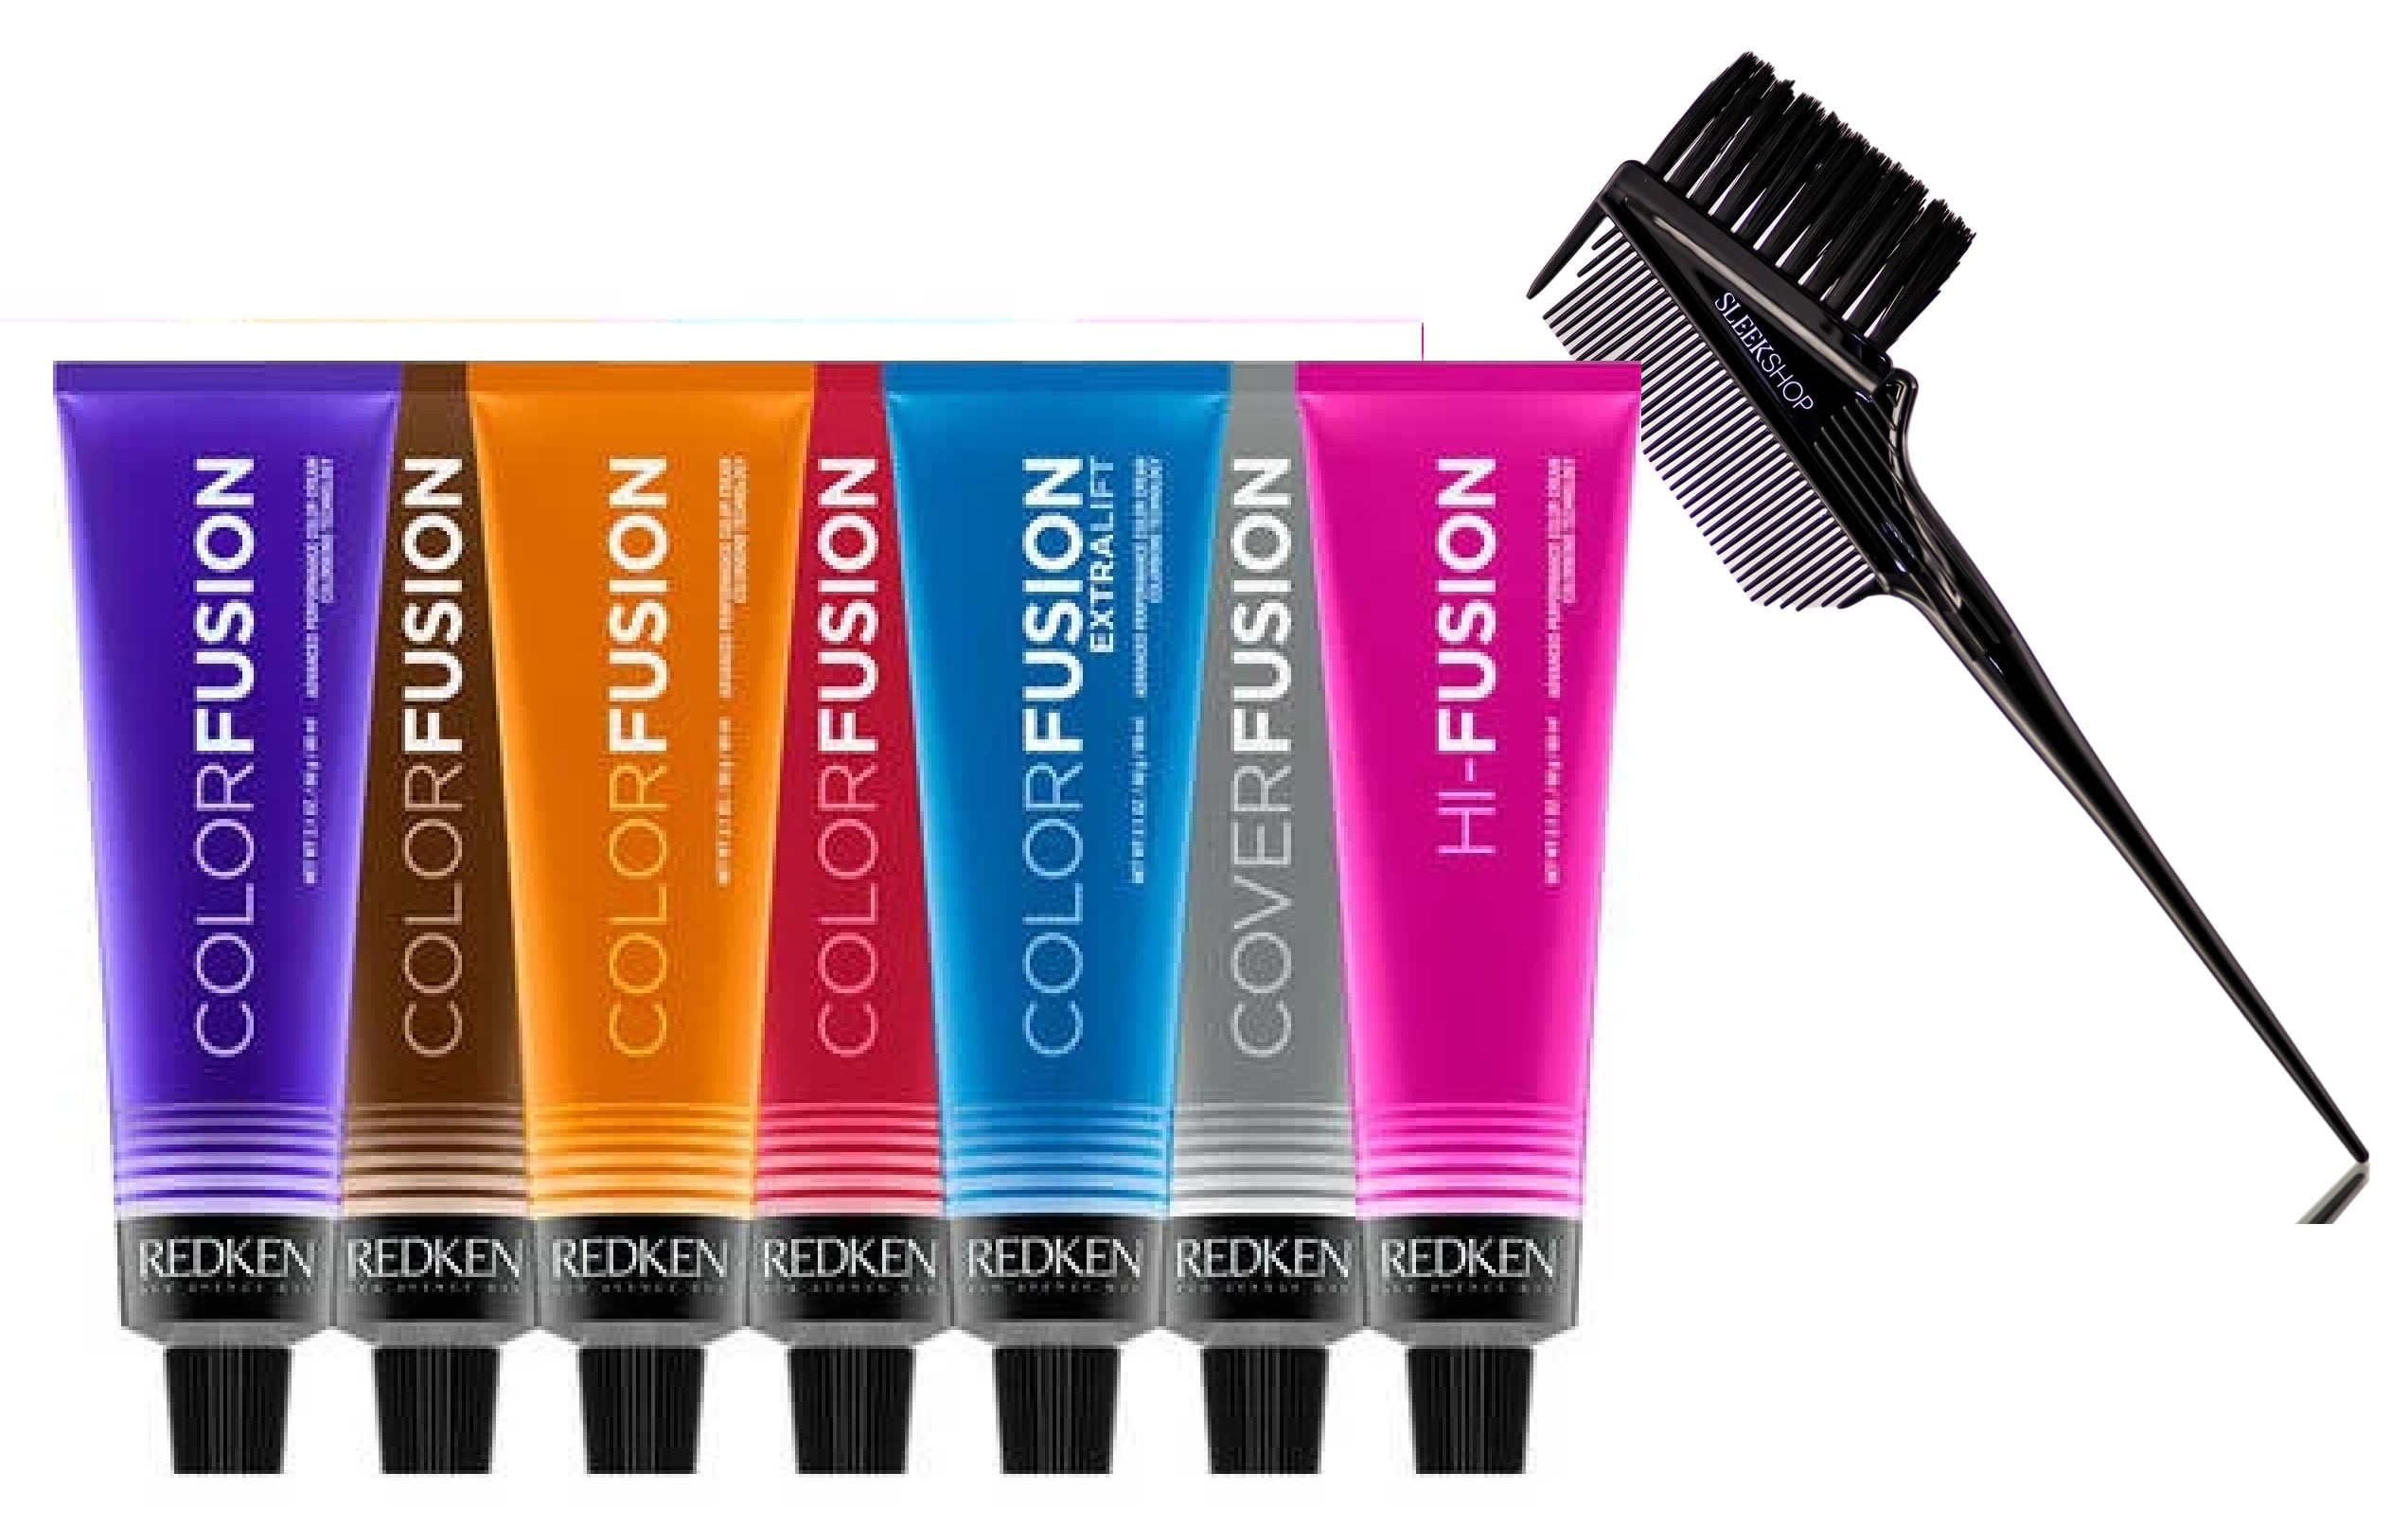 REDKEN O Orange : COLOR FUSION Advanced Performance Permanent Hair Color  Cream Dye Colorfusion Haircolor - Pack of 1 w/ Sleek 3-in-1 Brush Comb -  Walmart.com